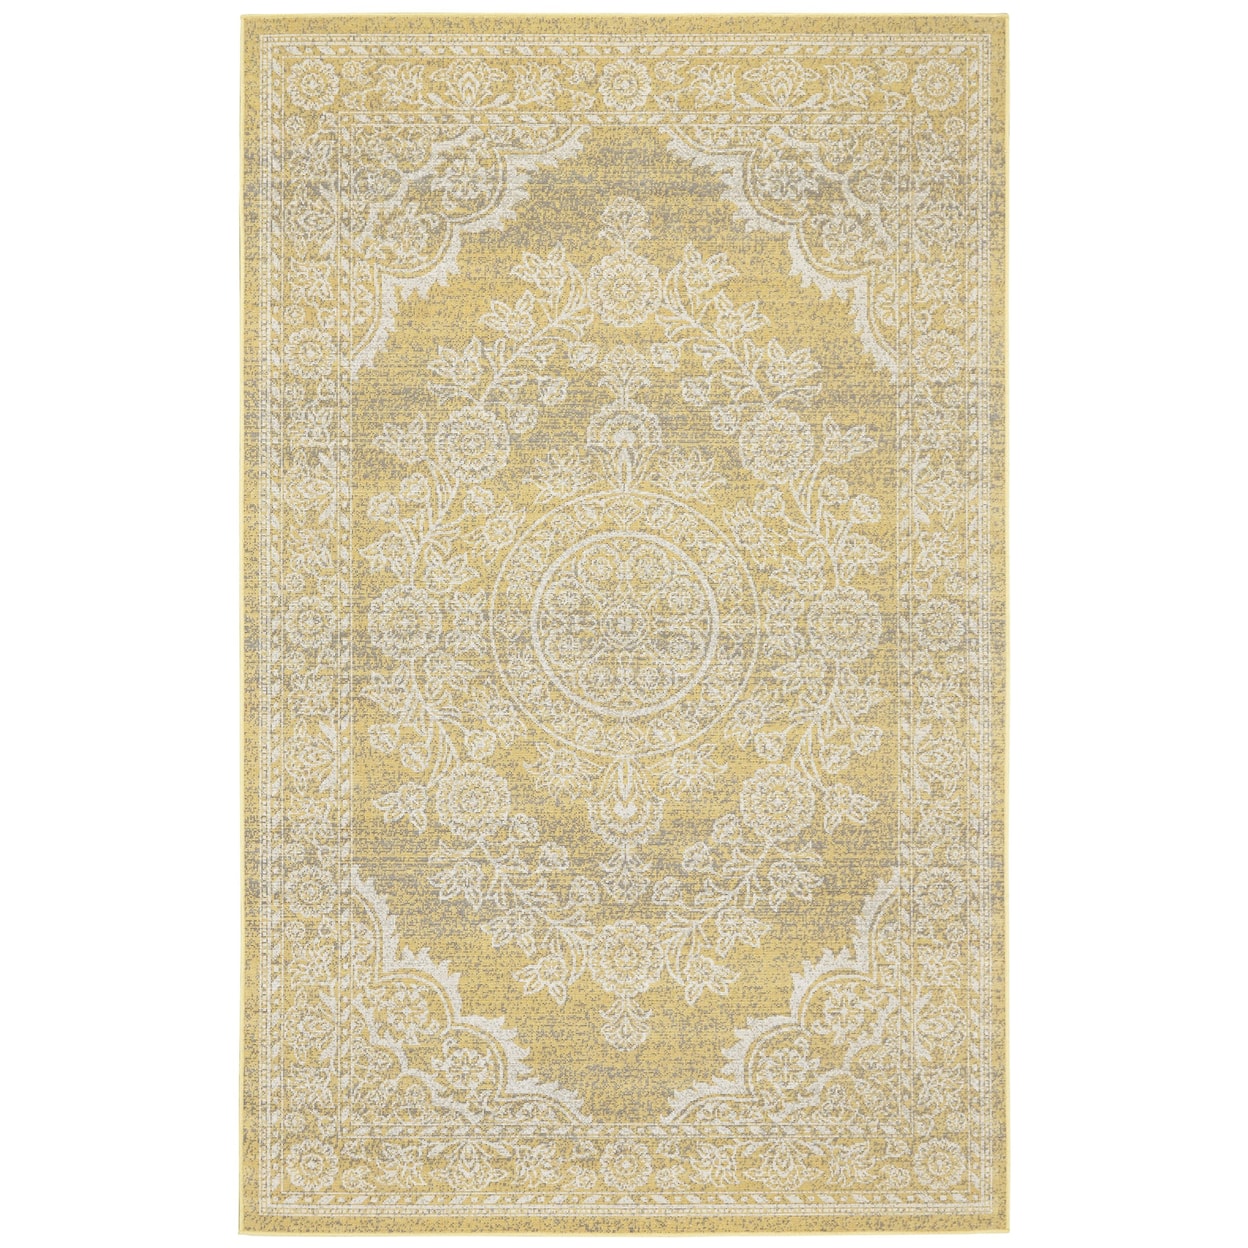 Feizy Rugs Thatcher Straw 5' x 8' Area Rug